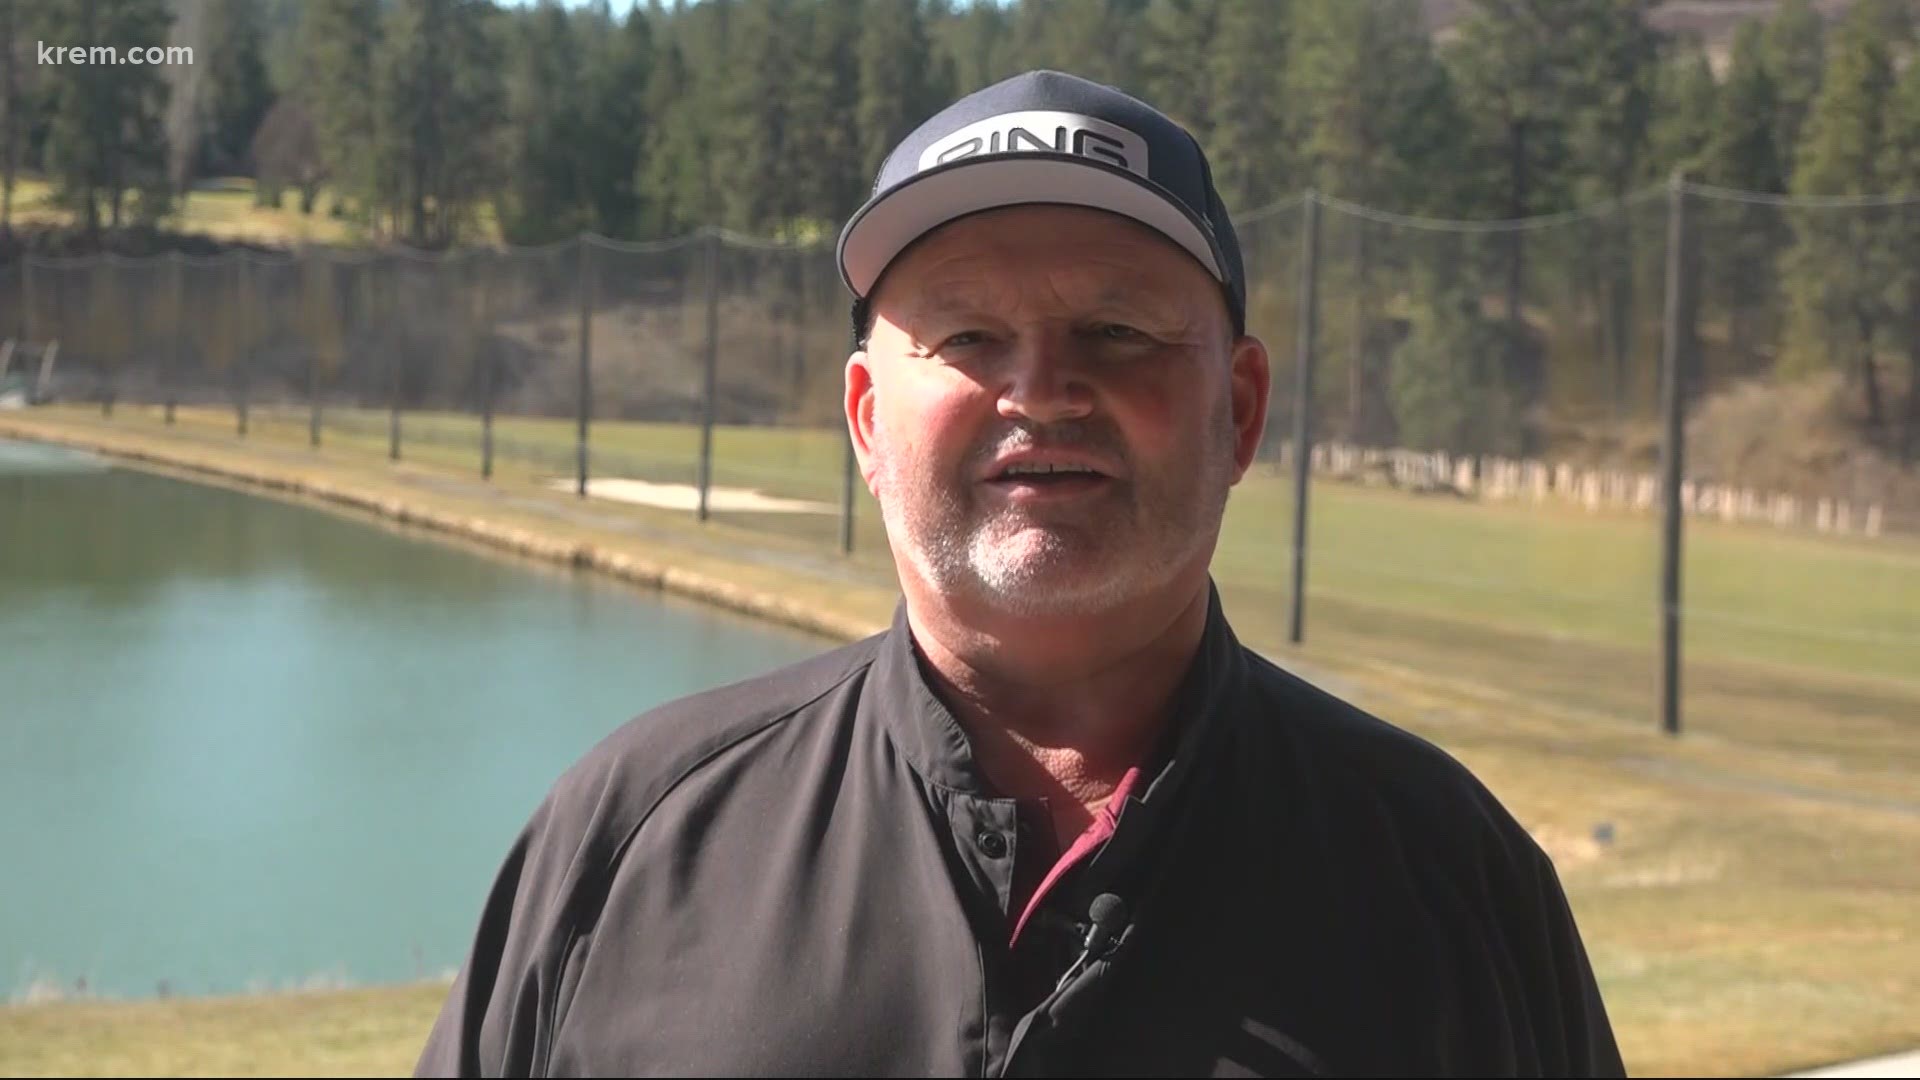 Golf course in Spokane County are preparing to open as sunny skies and warm temperatures have graced the region.